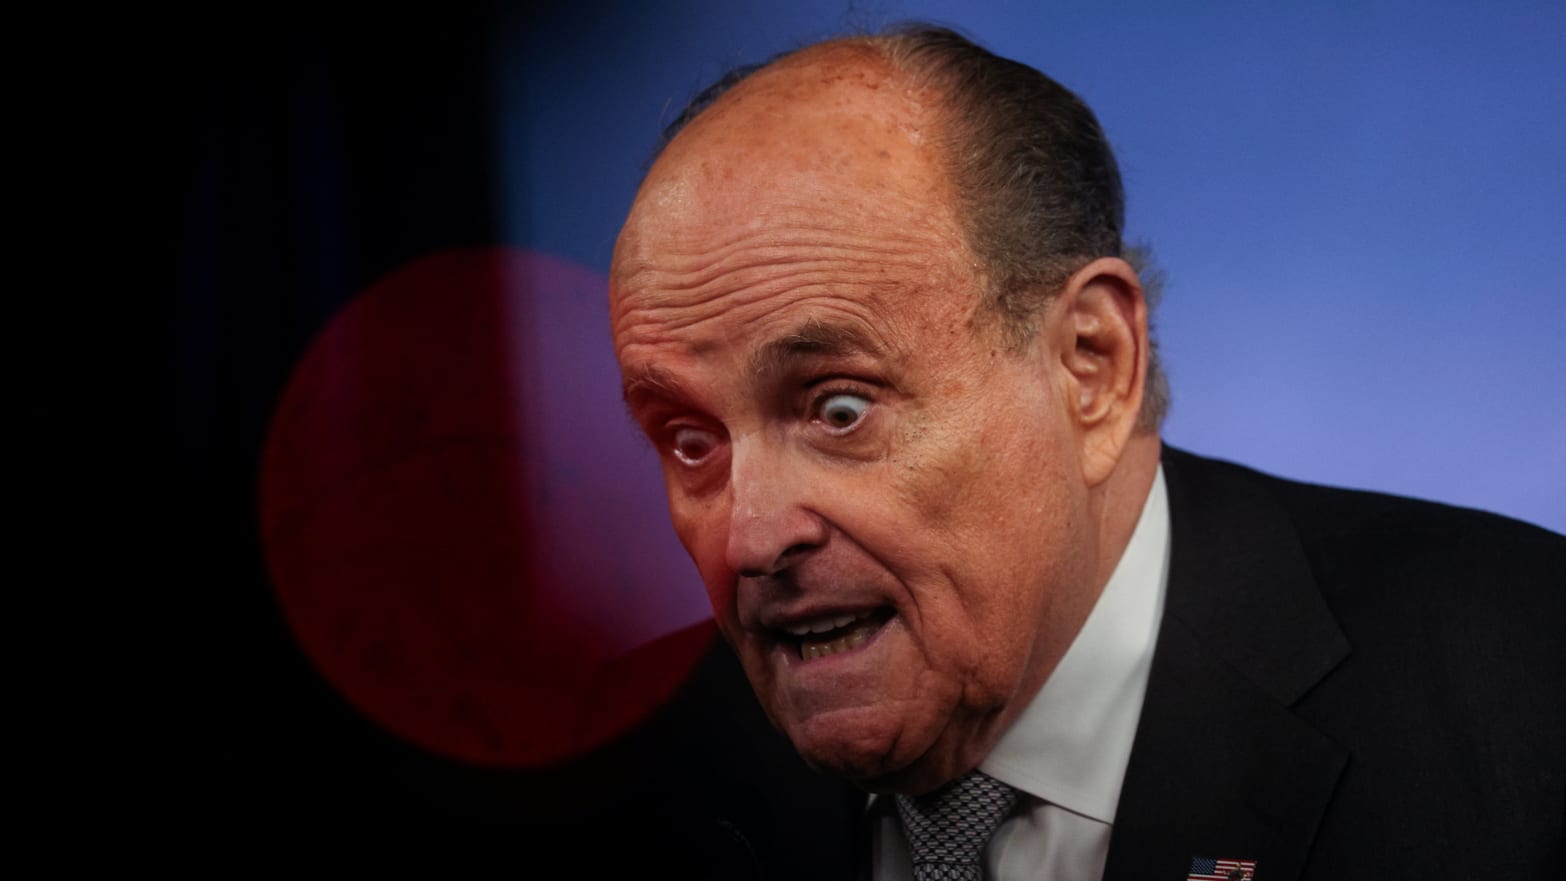 Former New York City Mayor Rudy Giuliani delivers remarks on the September 11 attacks during a news conference in New York, U.S., September 9, 2022.